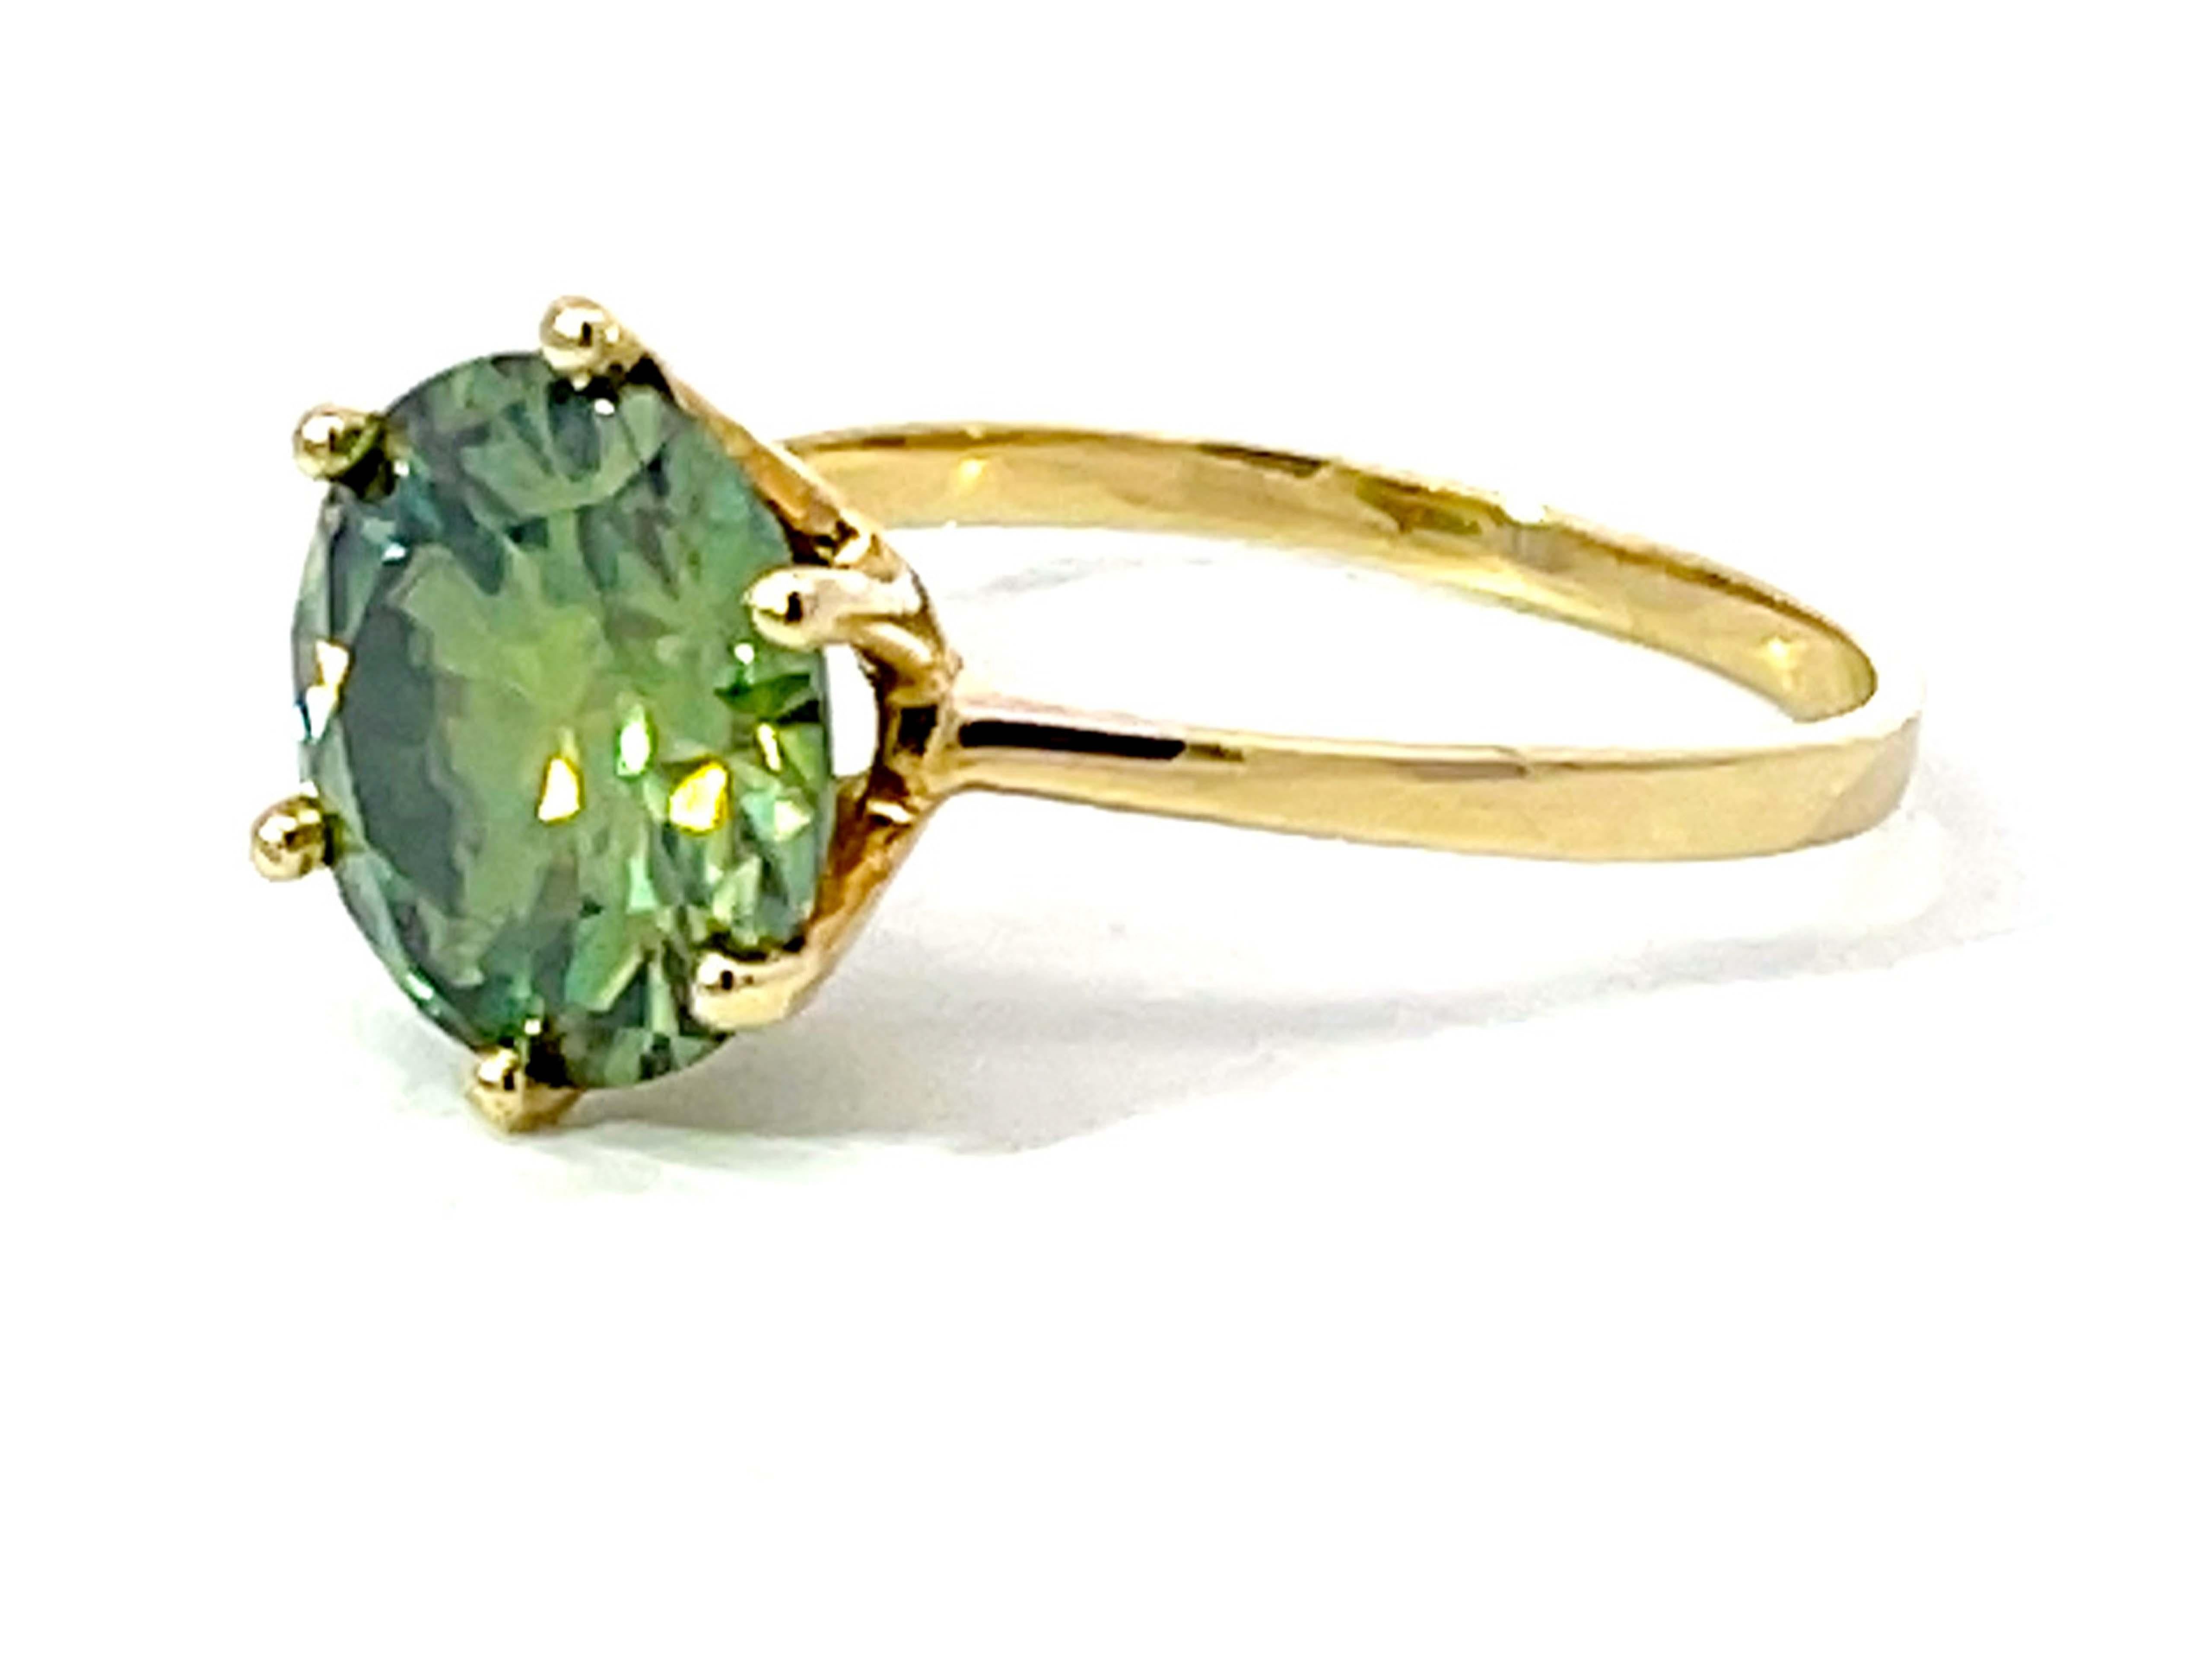 4 Carat Green Moissanite Ring in 14K Yellow Gold In Excellent Condition For Sale In Honolulu, HI